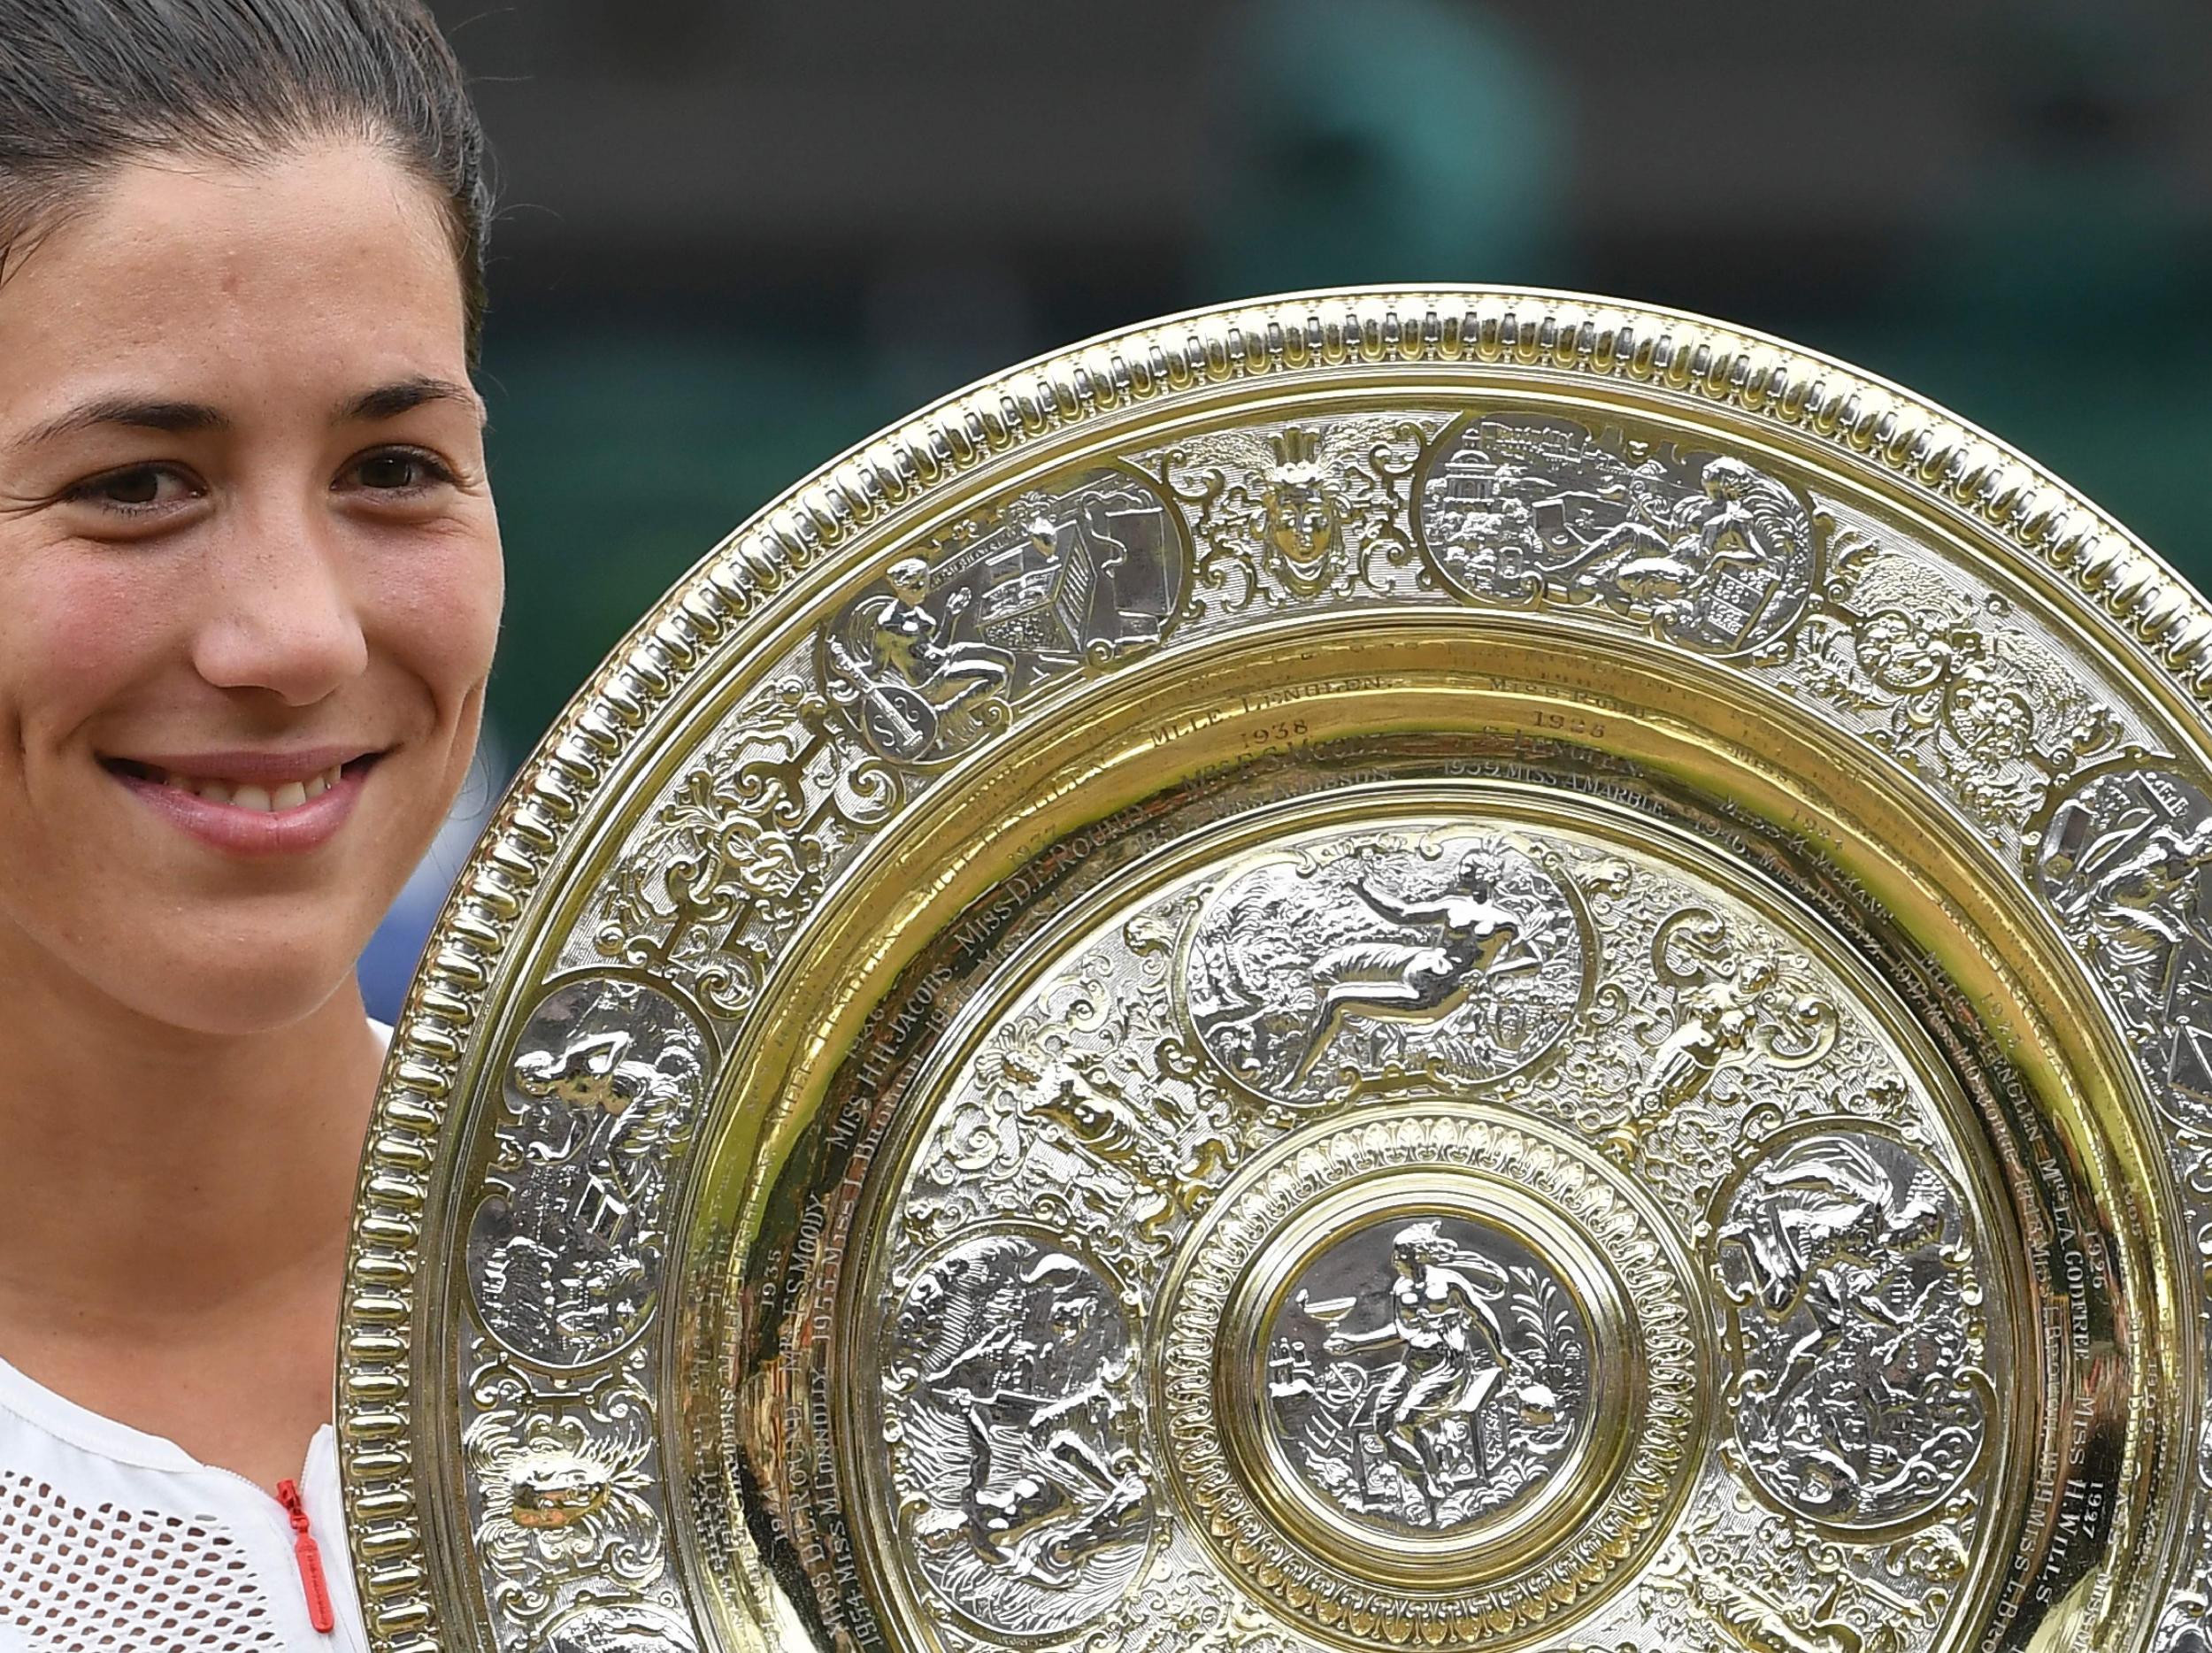 Two of Muguruza's three appearances in Grand Slam finals have at the All England Club